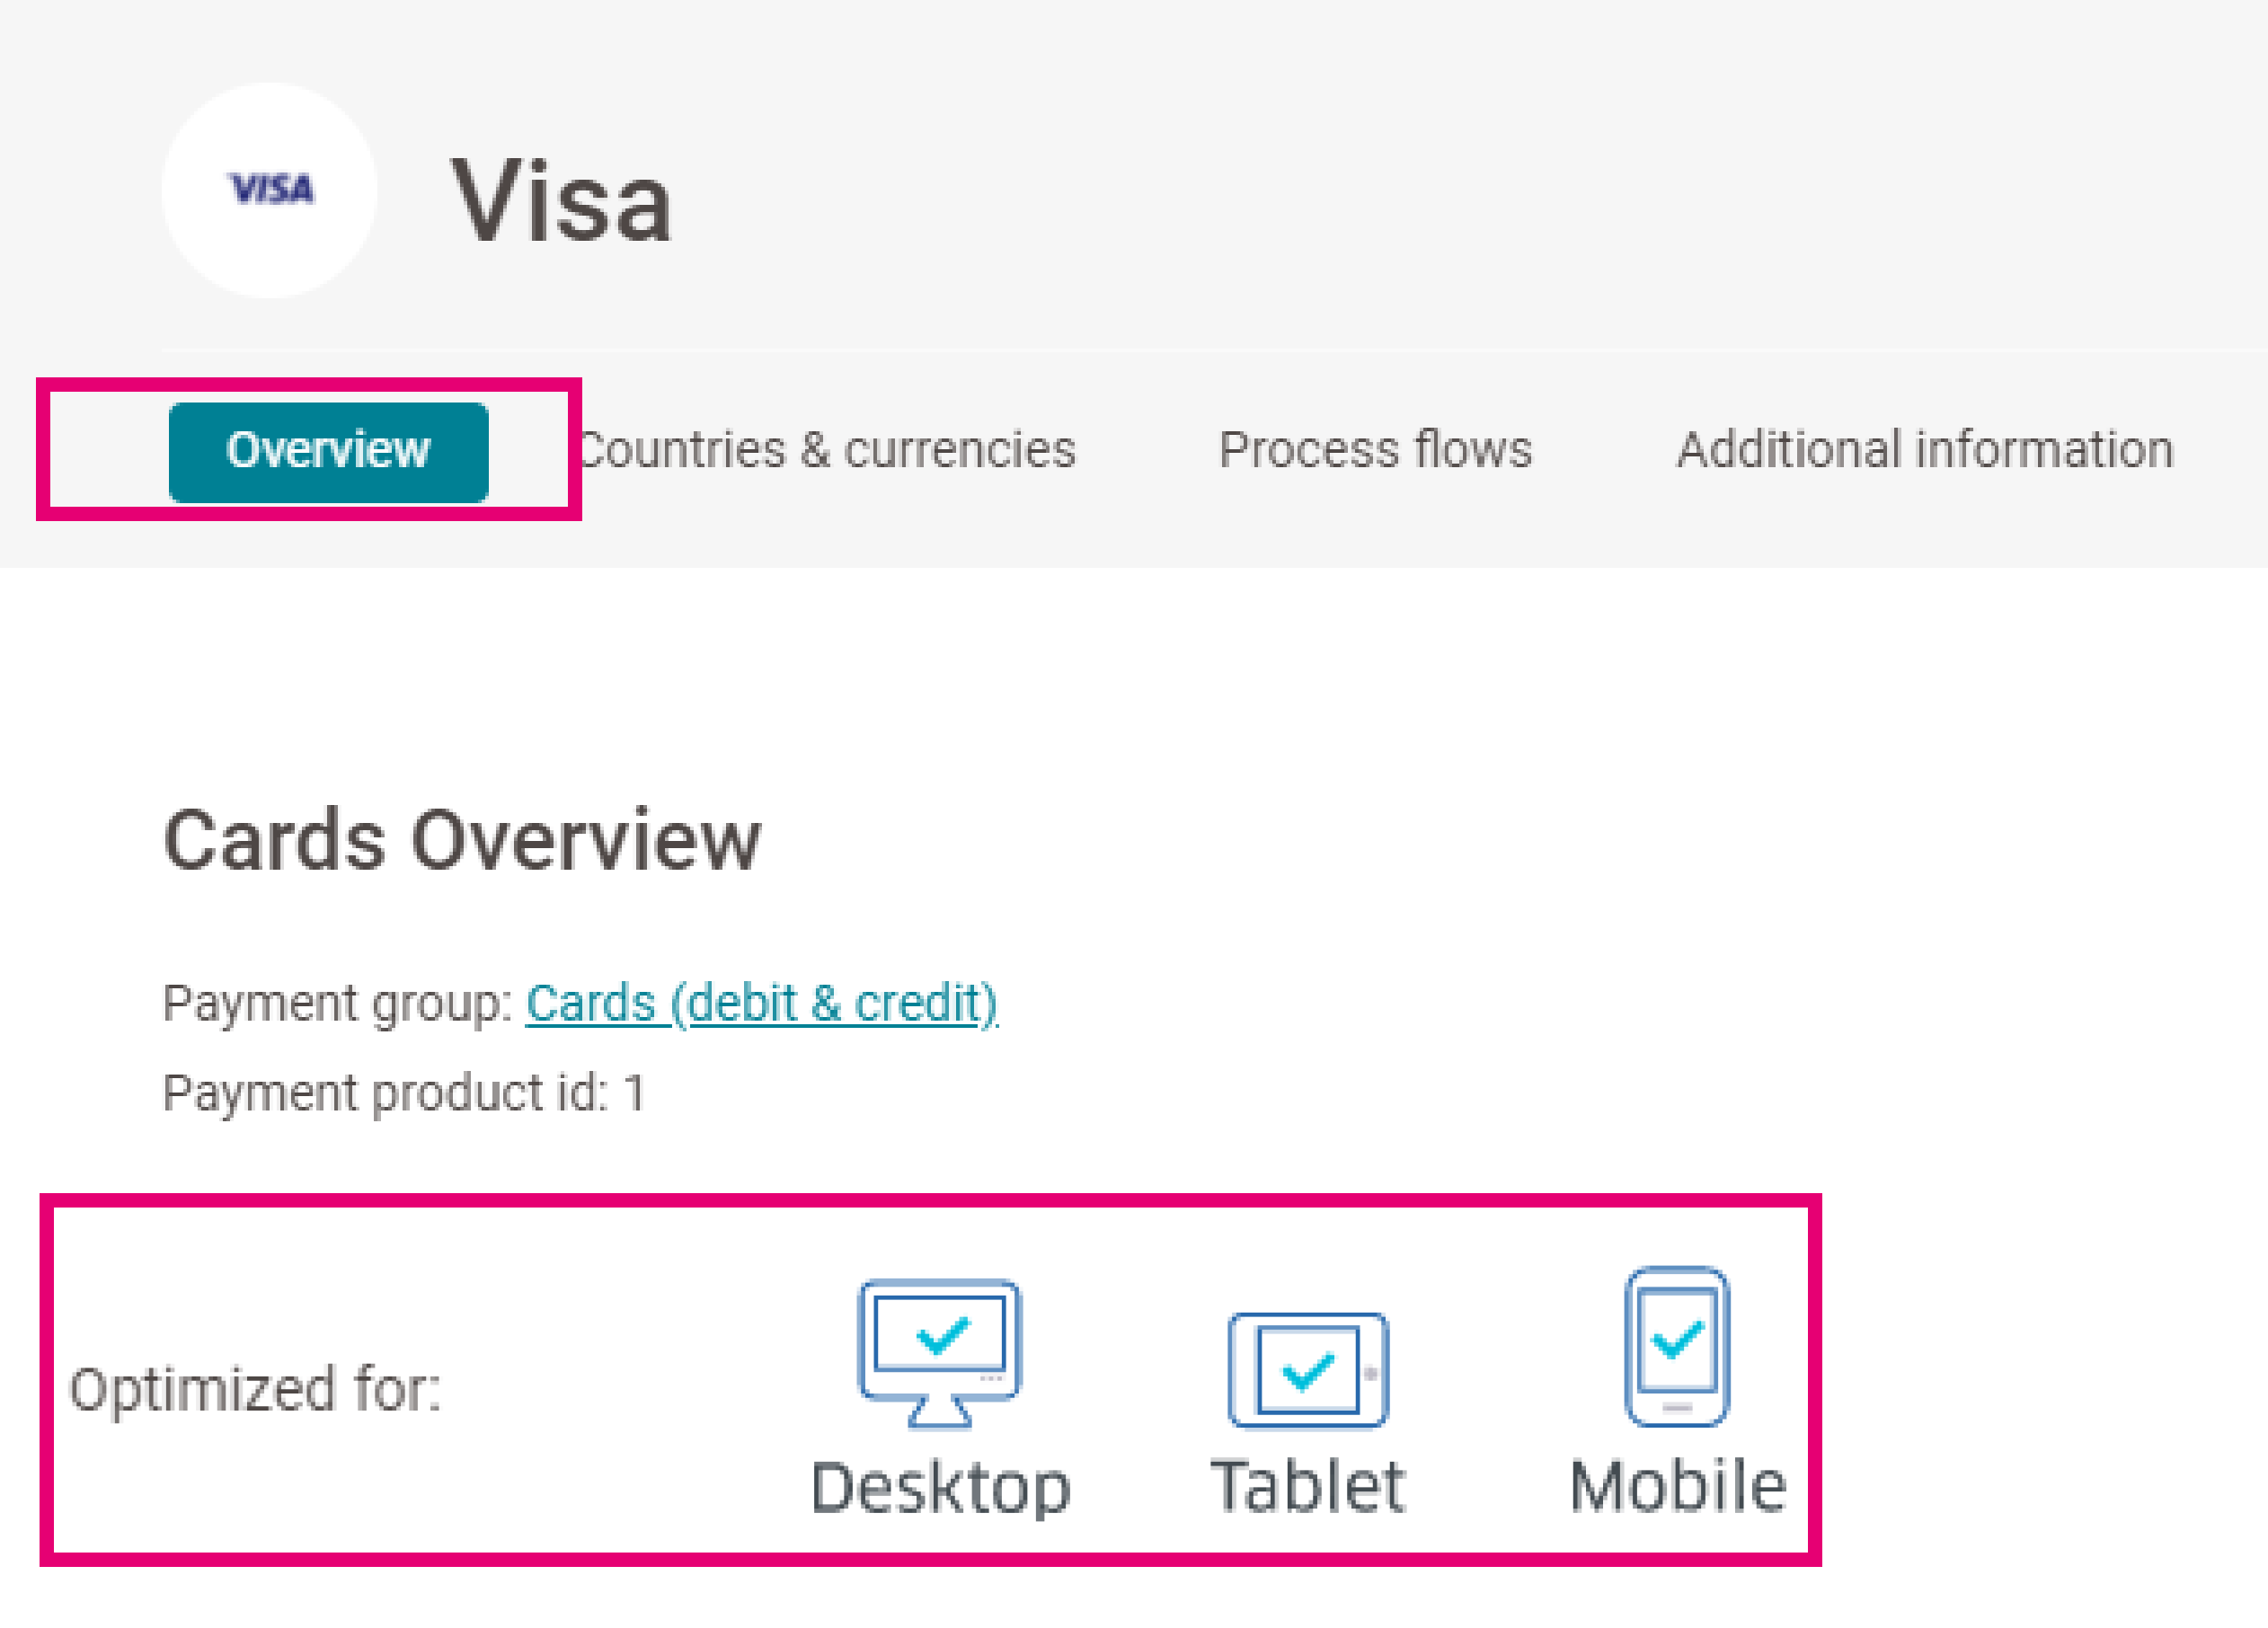 The image above shows where to find the “Optimized for” section in the “Overview” tab for any of our payment methods.